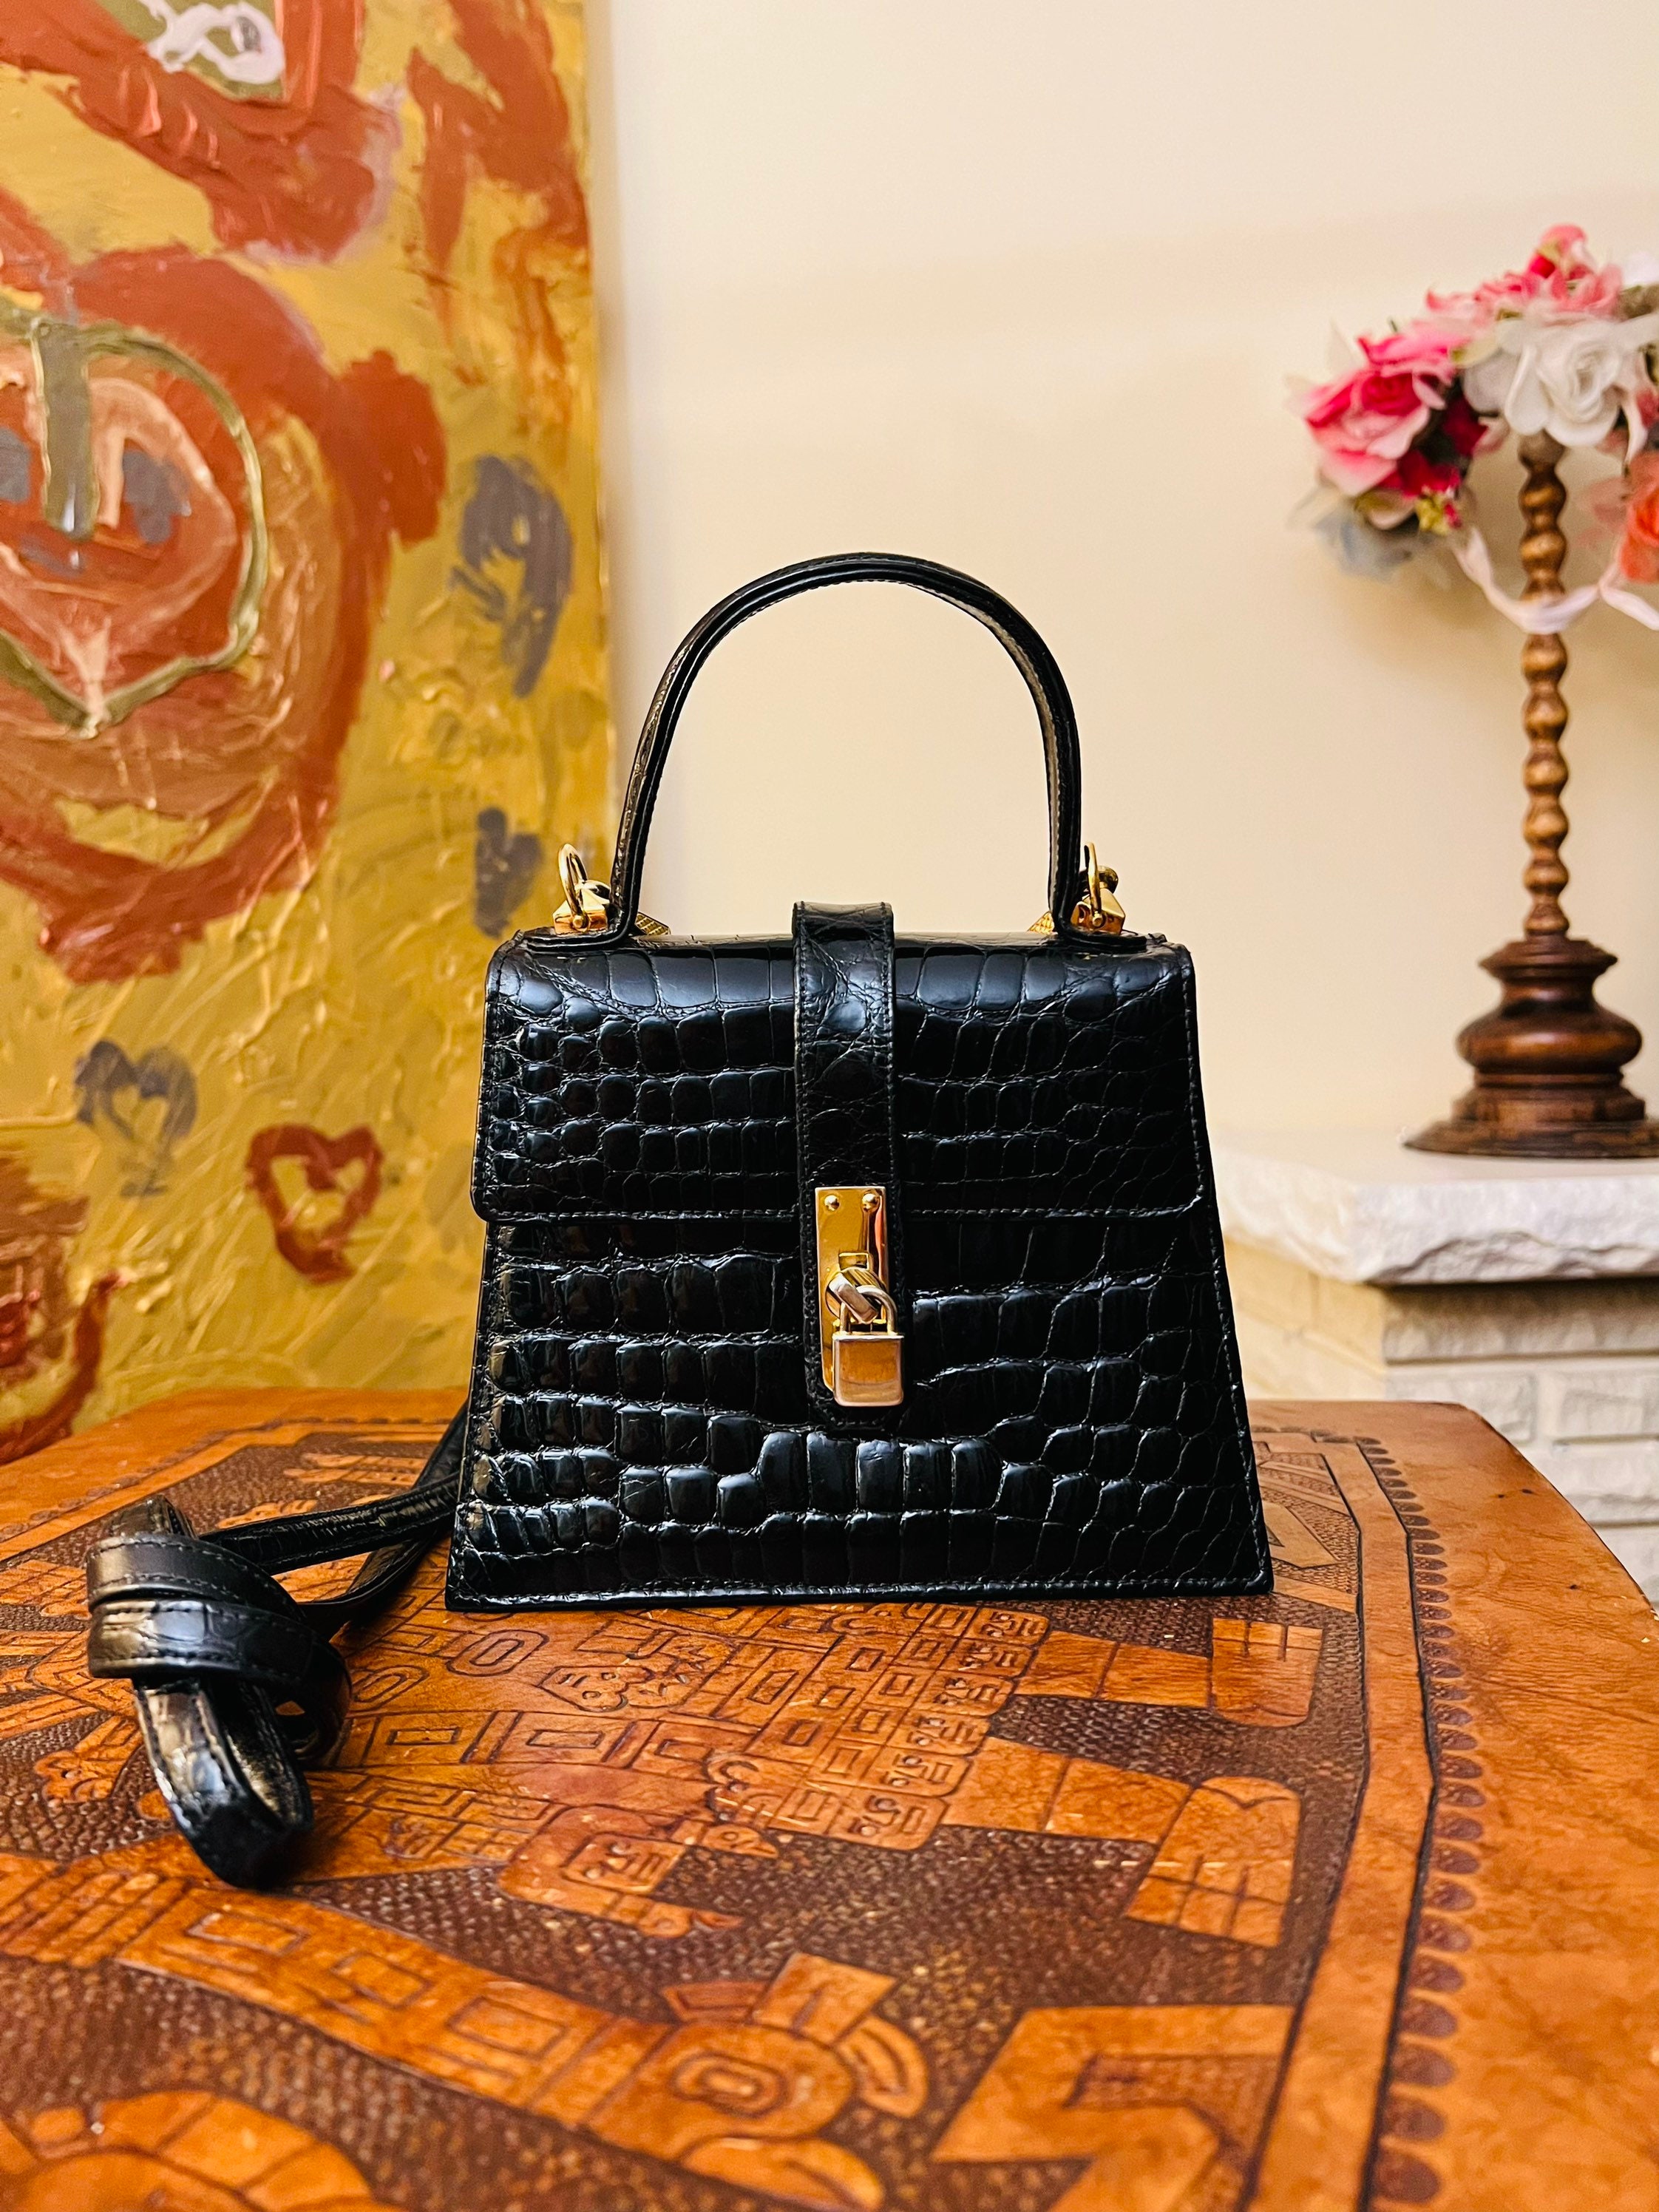 6 Designer Vintage Leather Handbags With Cute Looks and High Quality